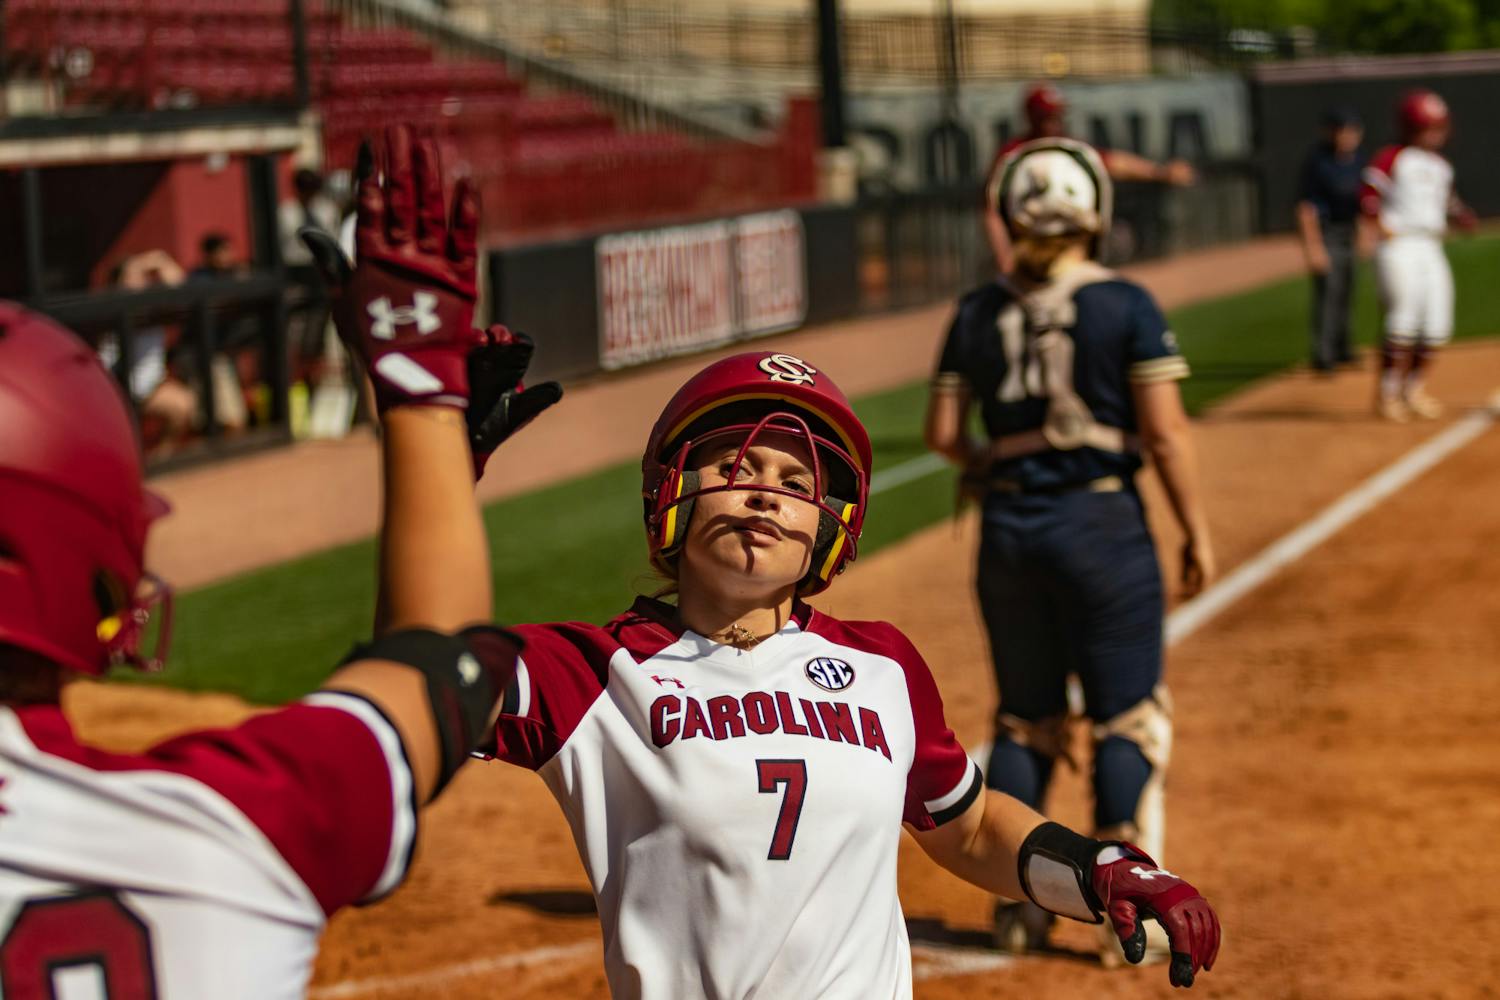 The South Carolina softball team hosted Charleston Southern at Beckham Field in a doubleheader on April 19, 2023. The Gamecocks took both games 5-0 and 11-2 and end their non-conference play with a record of 25-4.